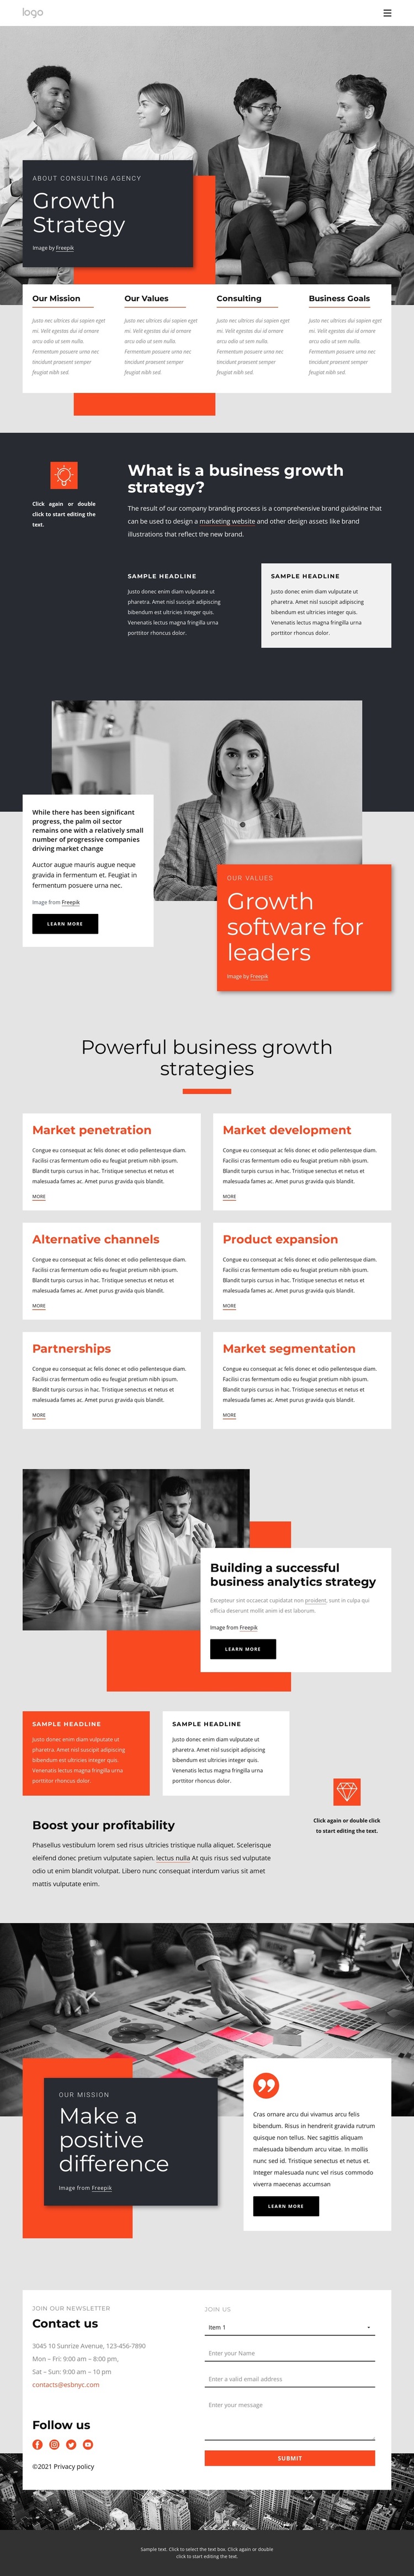 Growth strategy consultants HTML5 Template